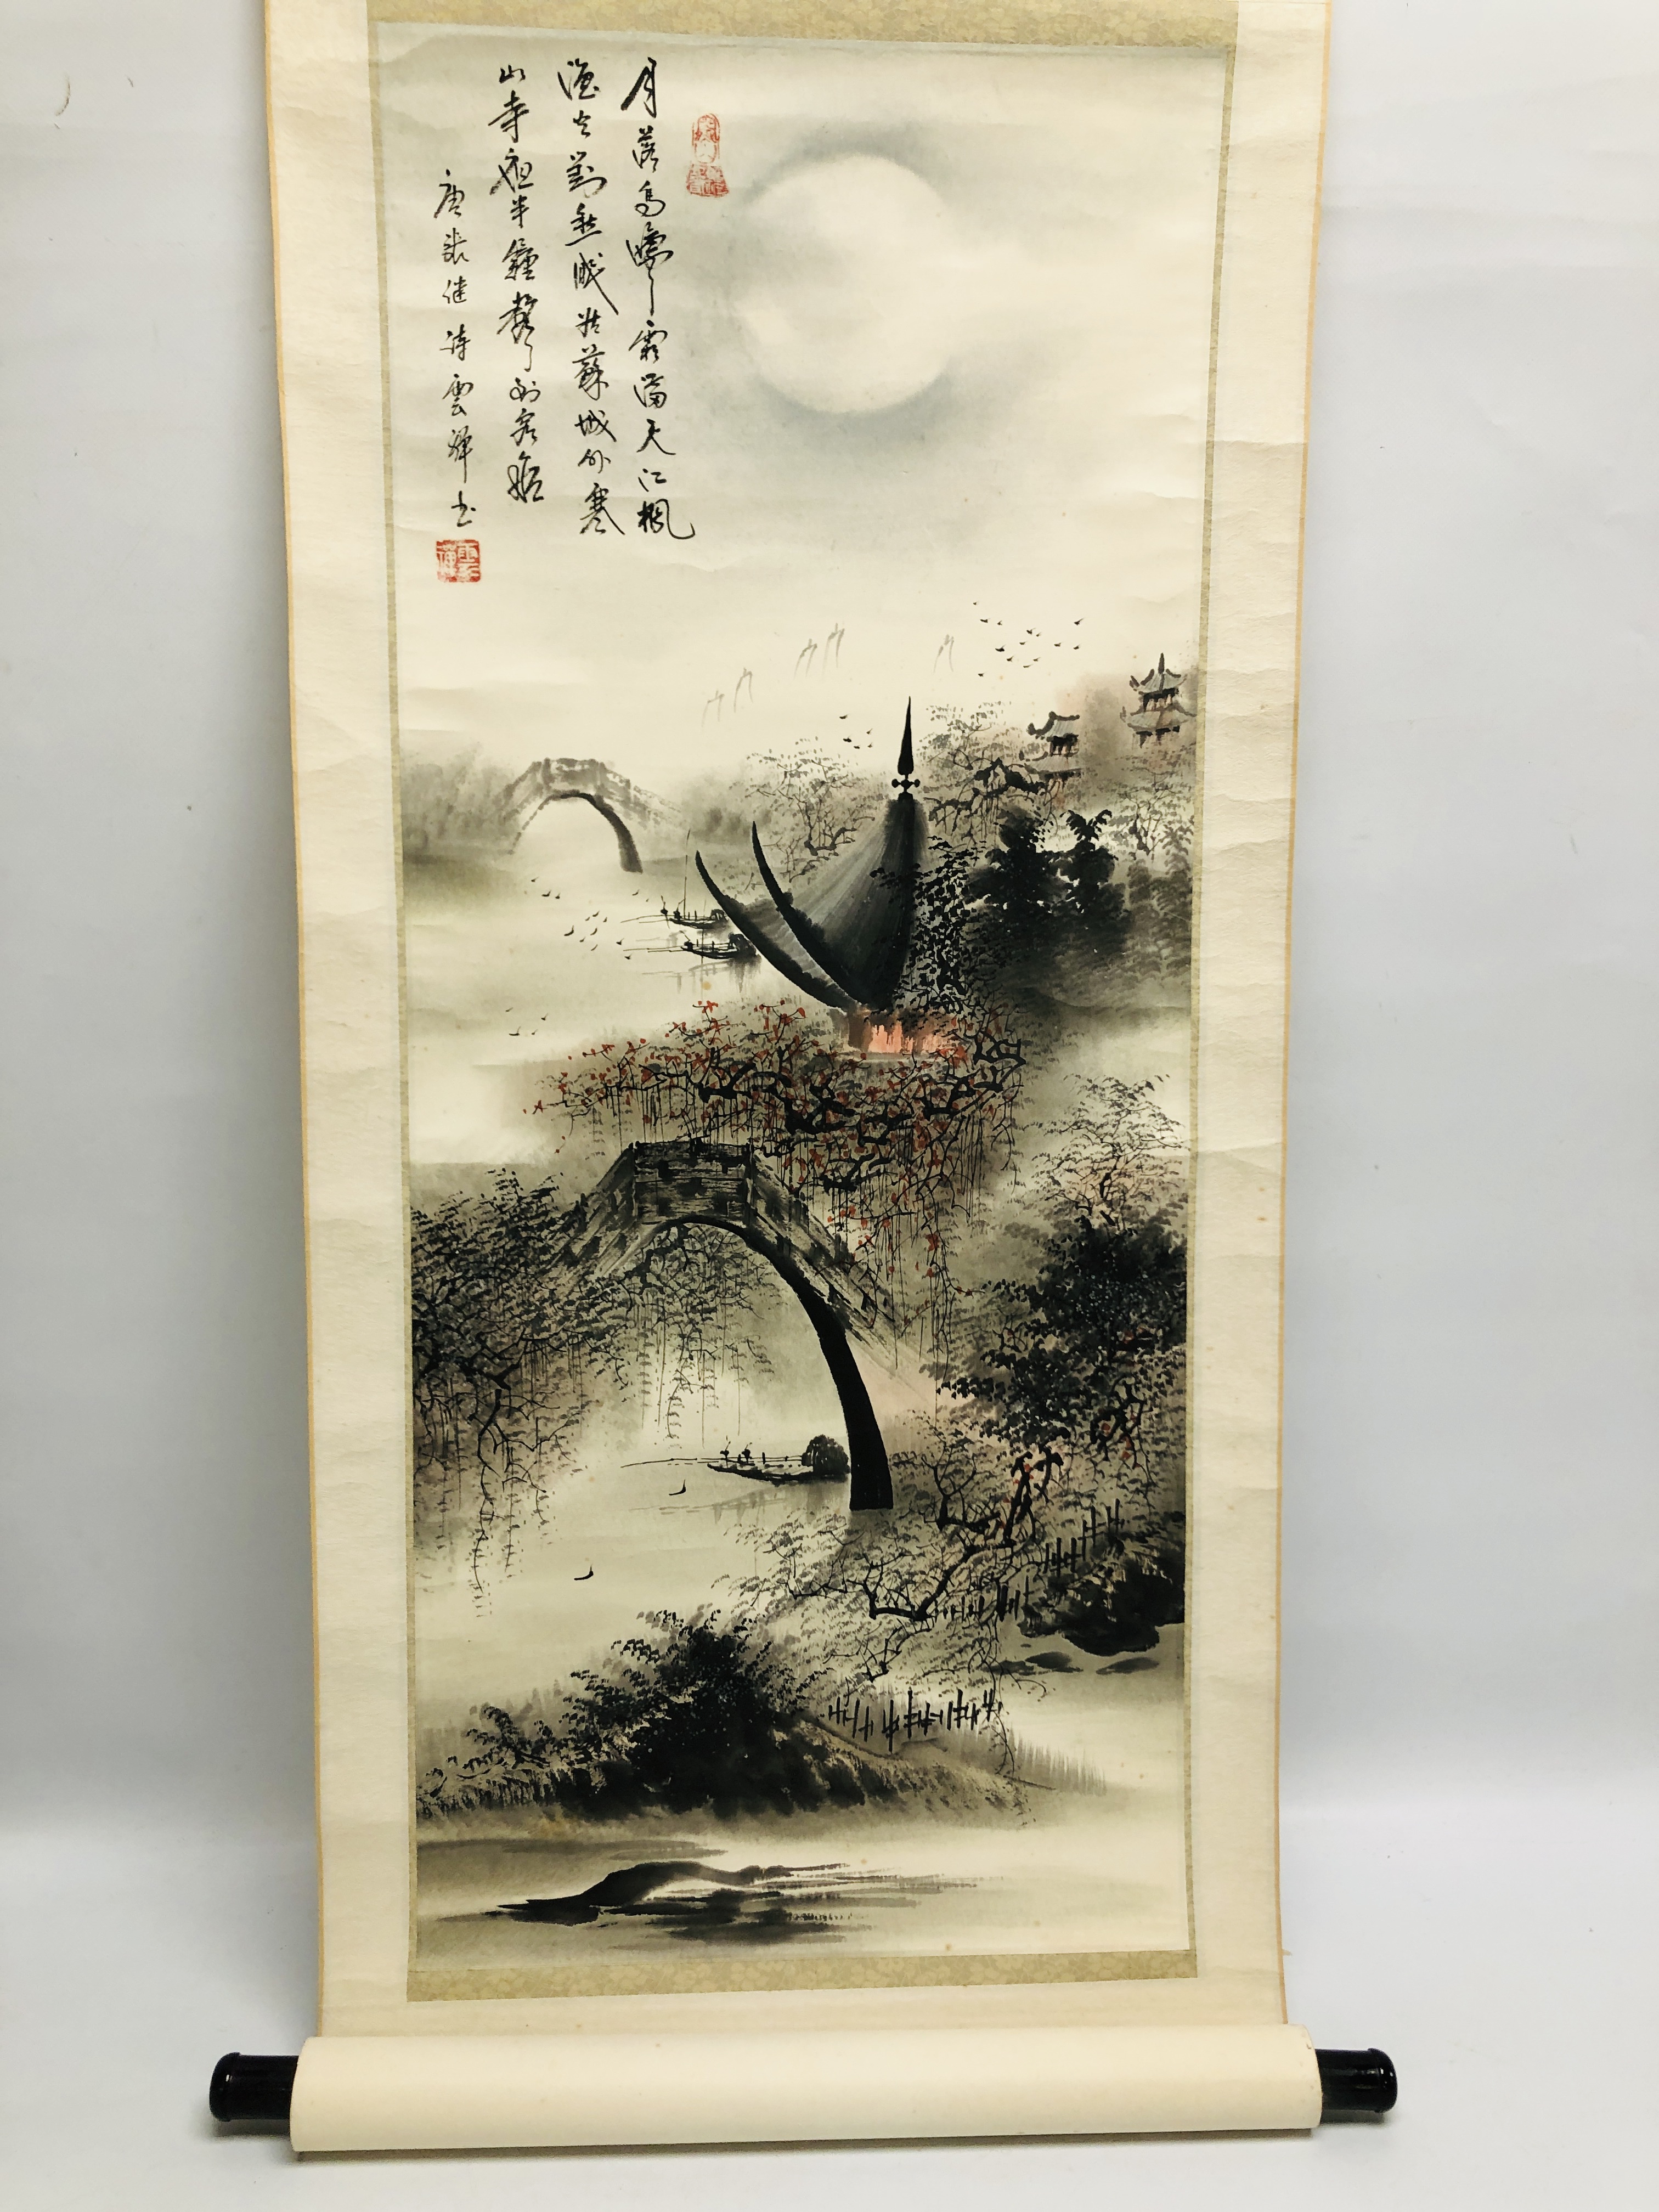 A JAPANESE SCROLL WATERCOLOUR OF BOATS, BRIDGES AND A PAGODA BEARING INSCRIPTION HEIGHT 158CM.